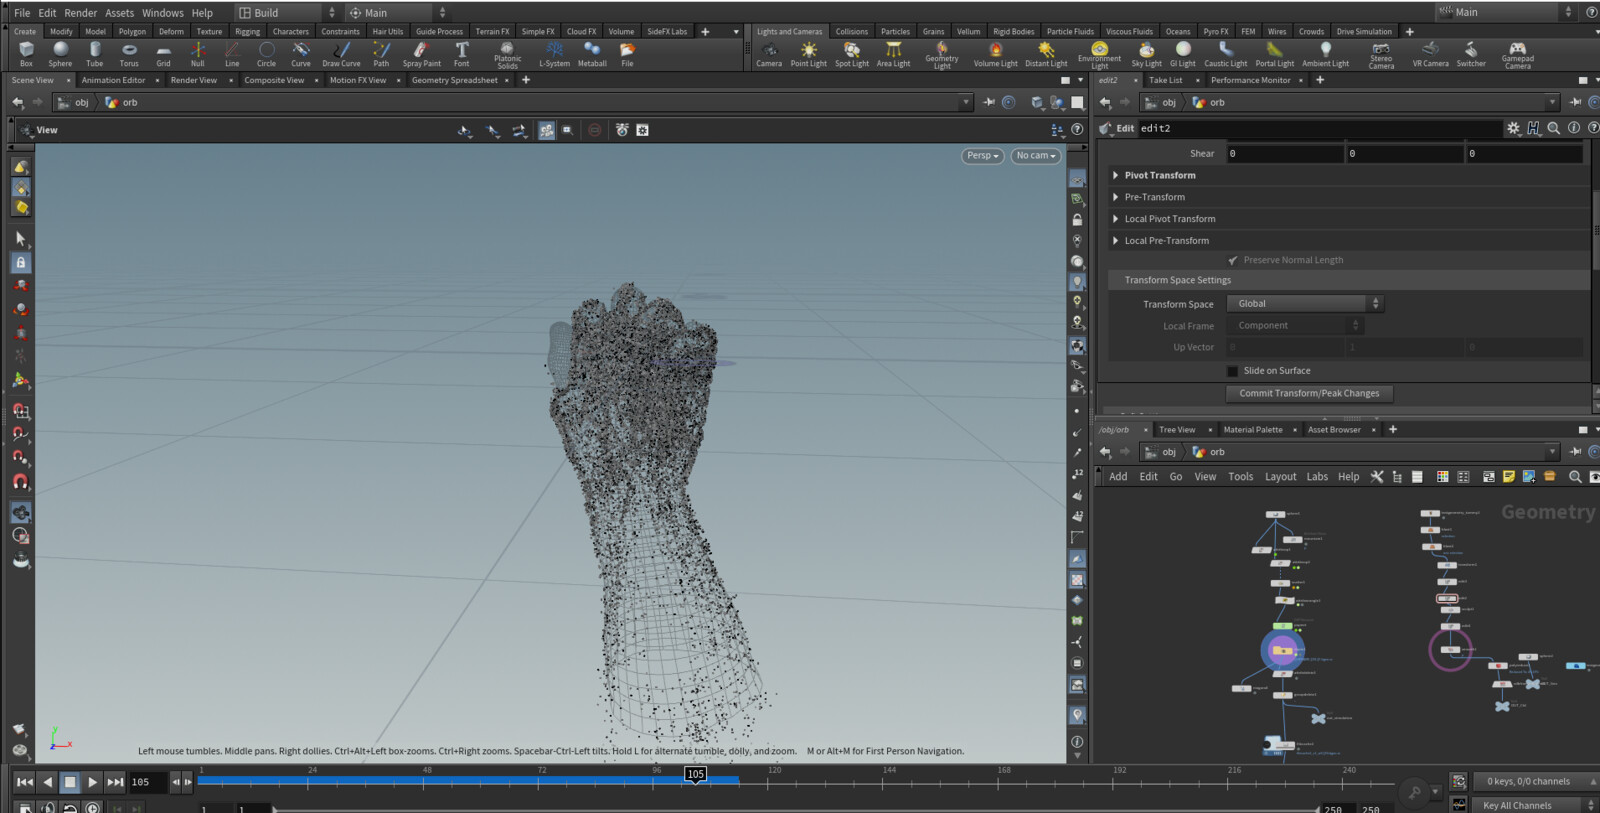 Houdini hand particles geometry. For a hand model I choose standard human model in Houdini and modeled it untill it will become a fist and filled it by particles. 